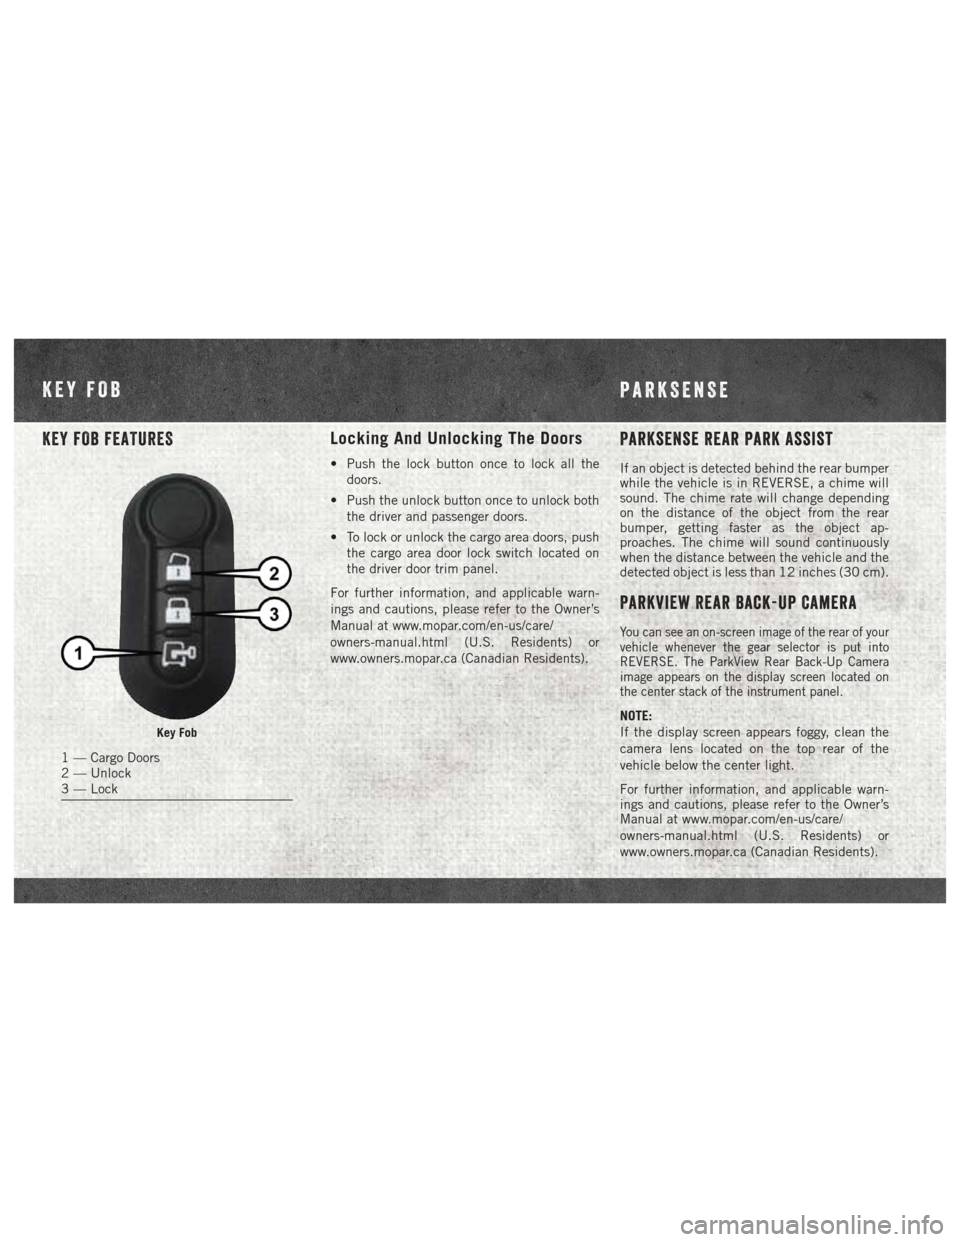 Ram ProMaster 2018  Quick Reference Guide KEY FOB FEATURESLocking And Unlocking The Doors
• Push the lock button once to lock all thedoors.
• Push the unlock button once to unlock both the driver and passenger doors.
• To lock or unlock